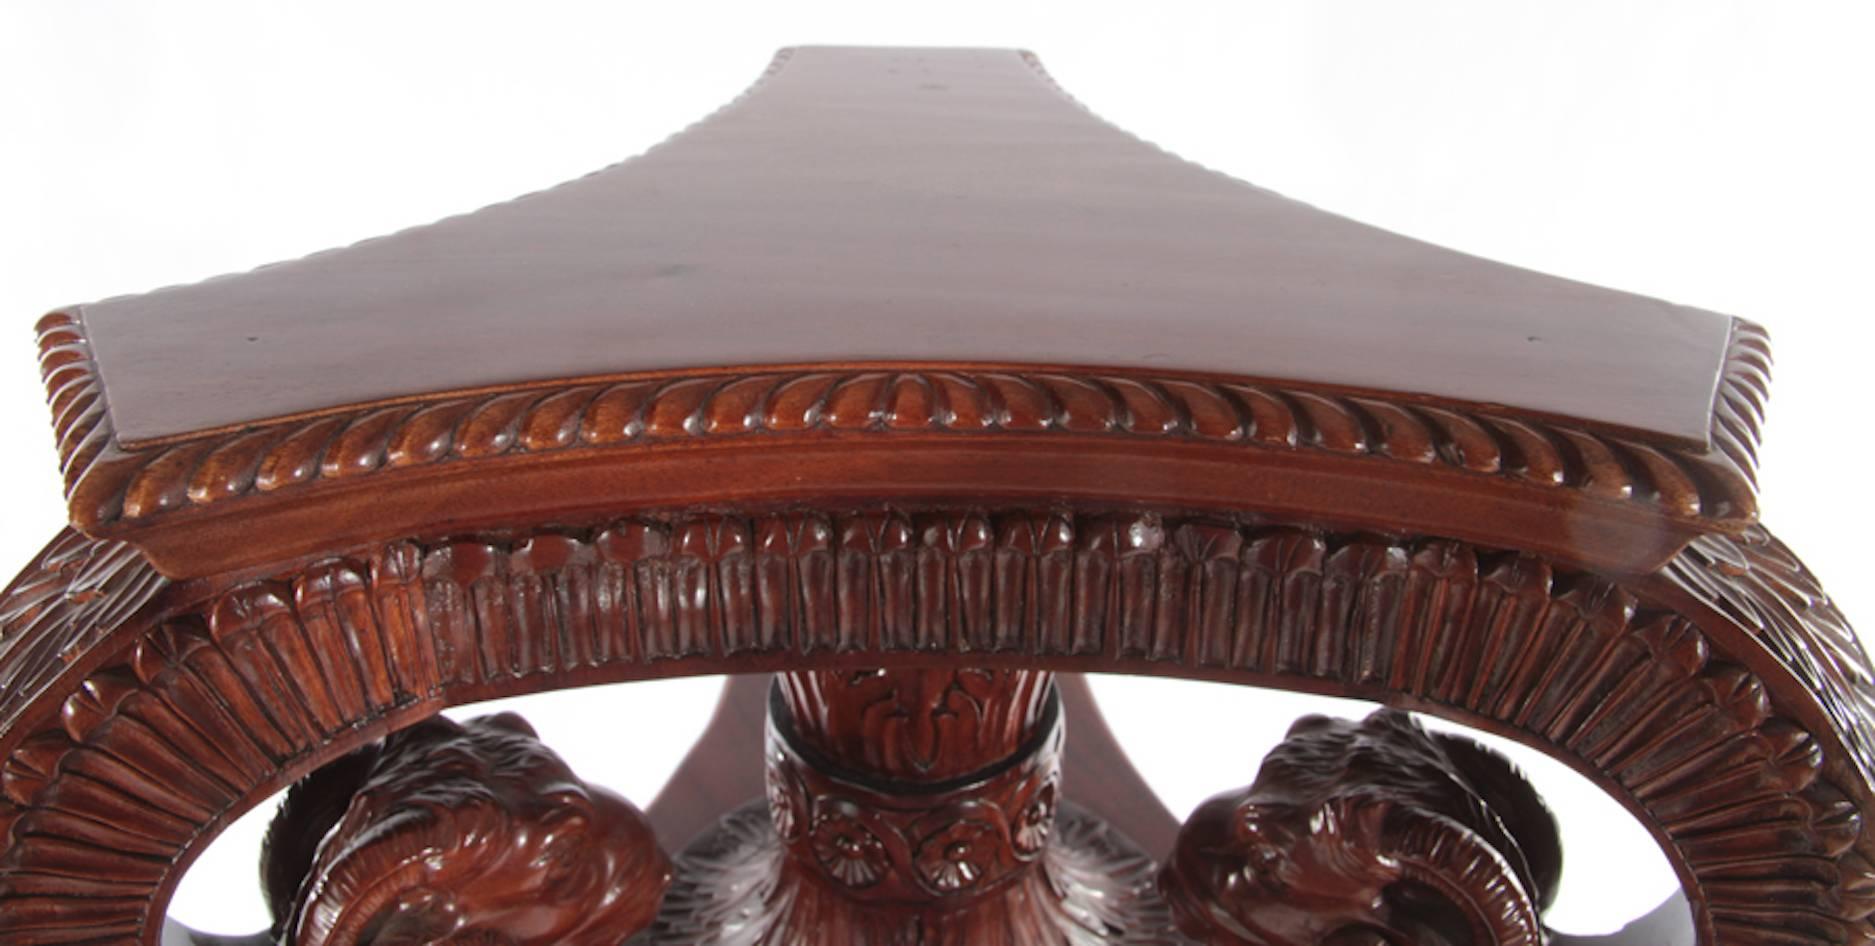 A carved mahogany athenienne or pedestal, ram's head supported top and hoofed feet, raised on a stepped base. Measures: Height 57.5